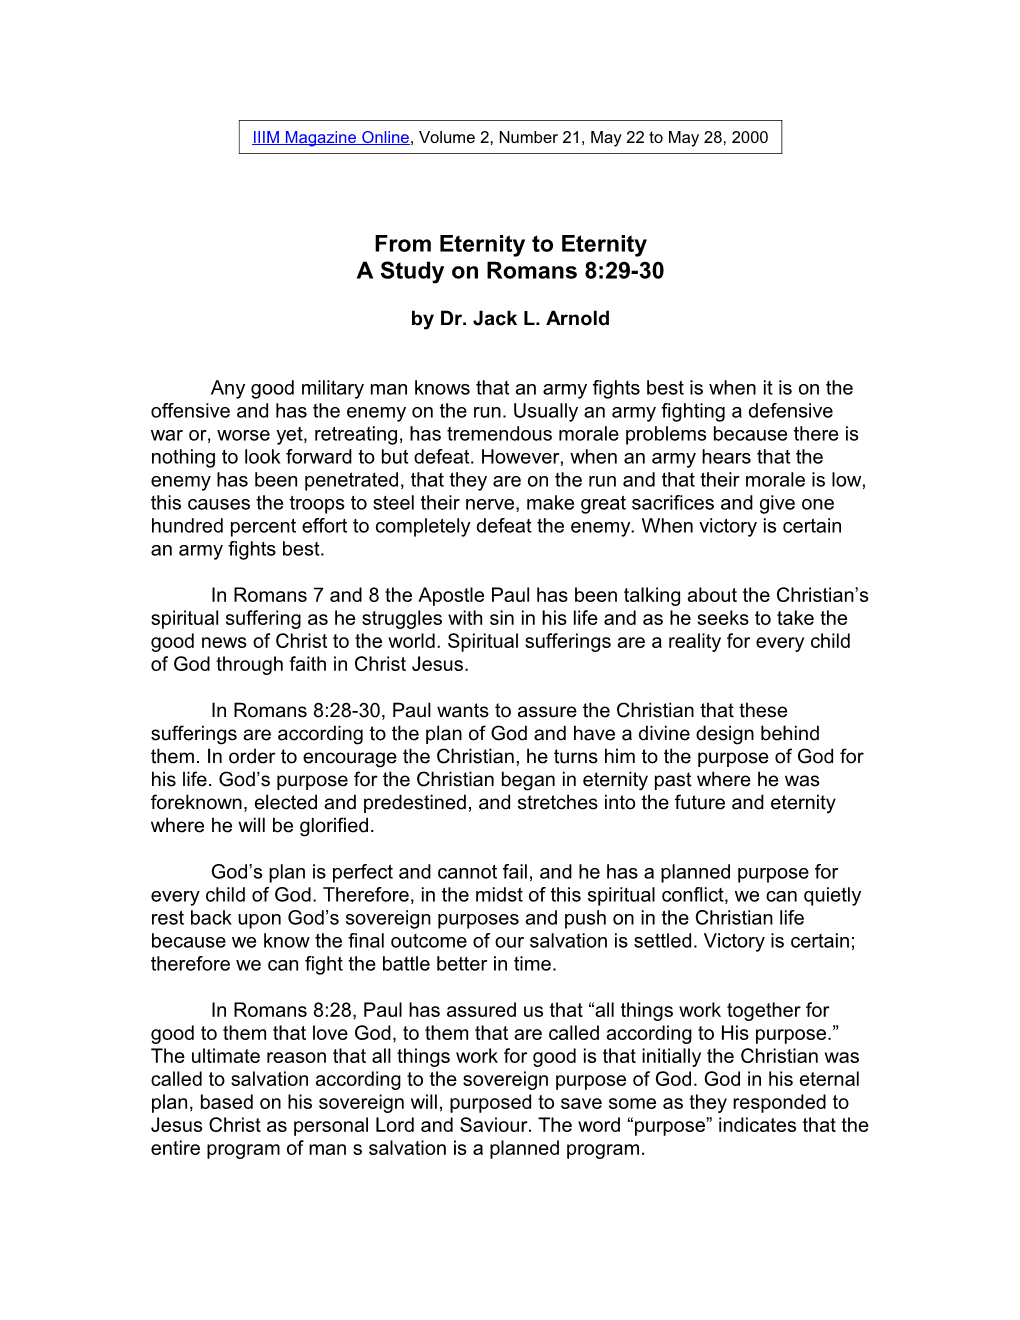 From Eternity to Eternity a Study on Romans 8:29-30 by Dr. Jack L. Arnold